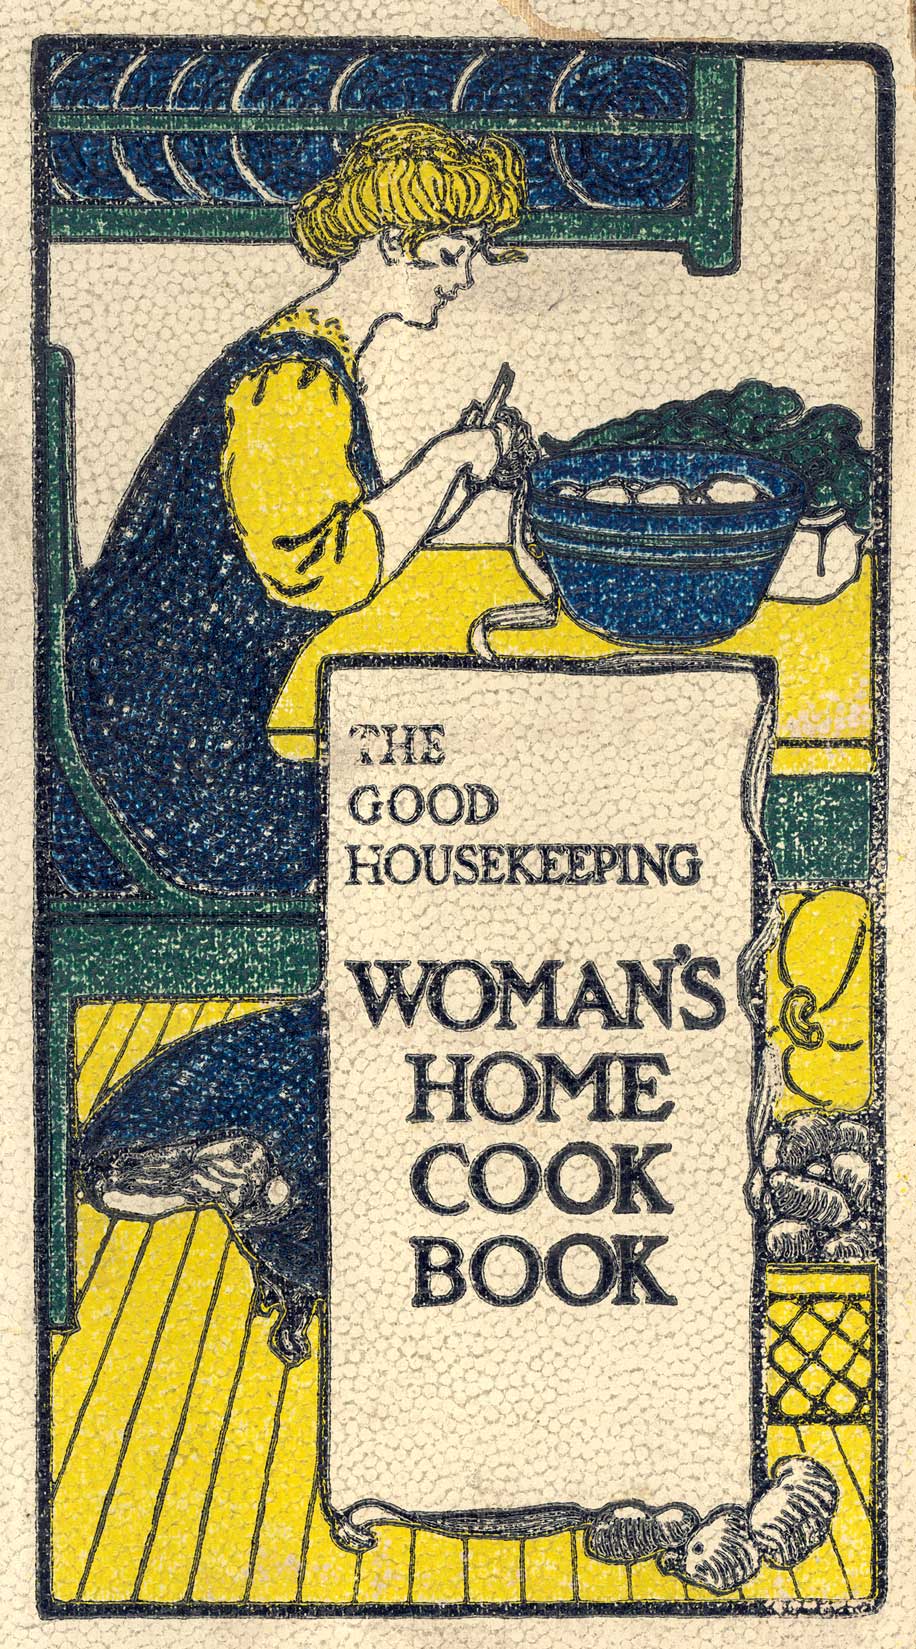 The good housekeeping woman's home cook book